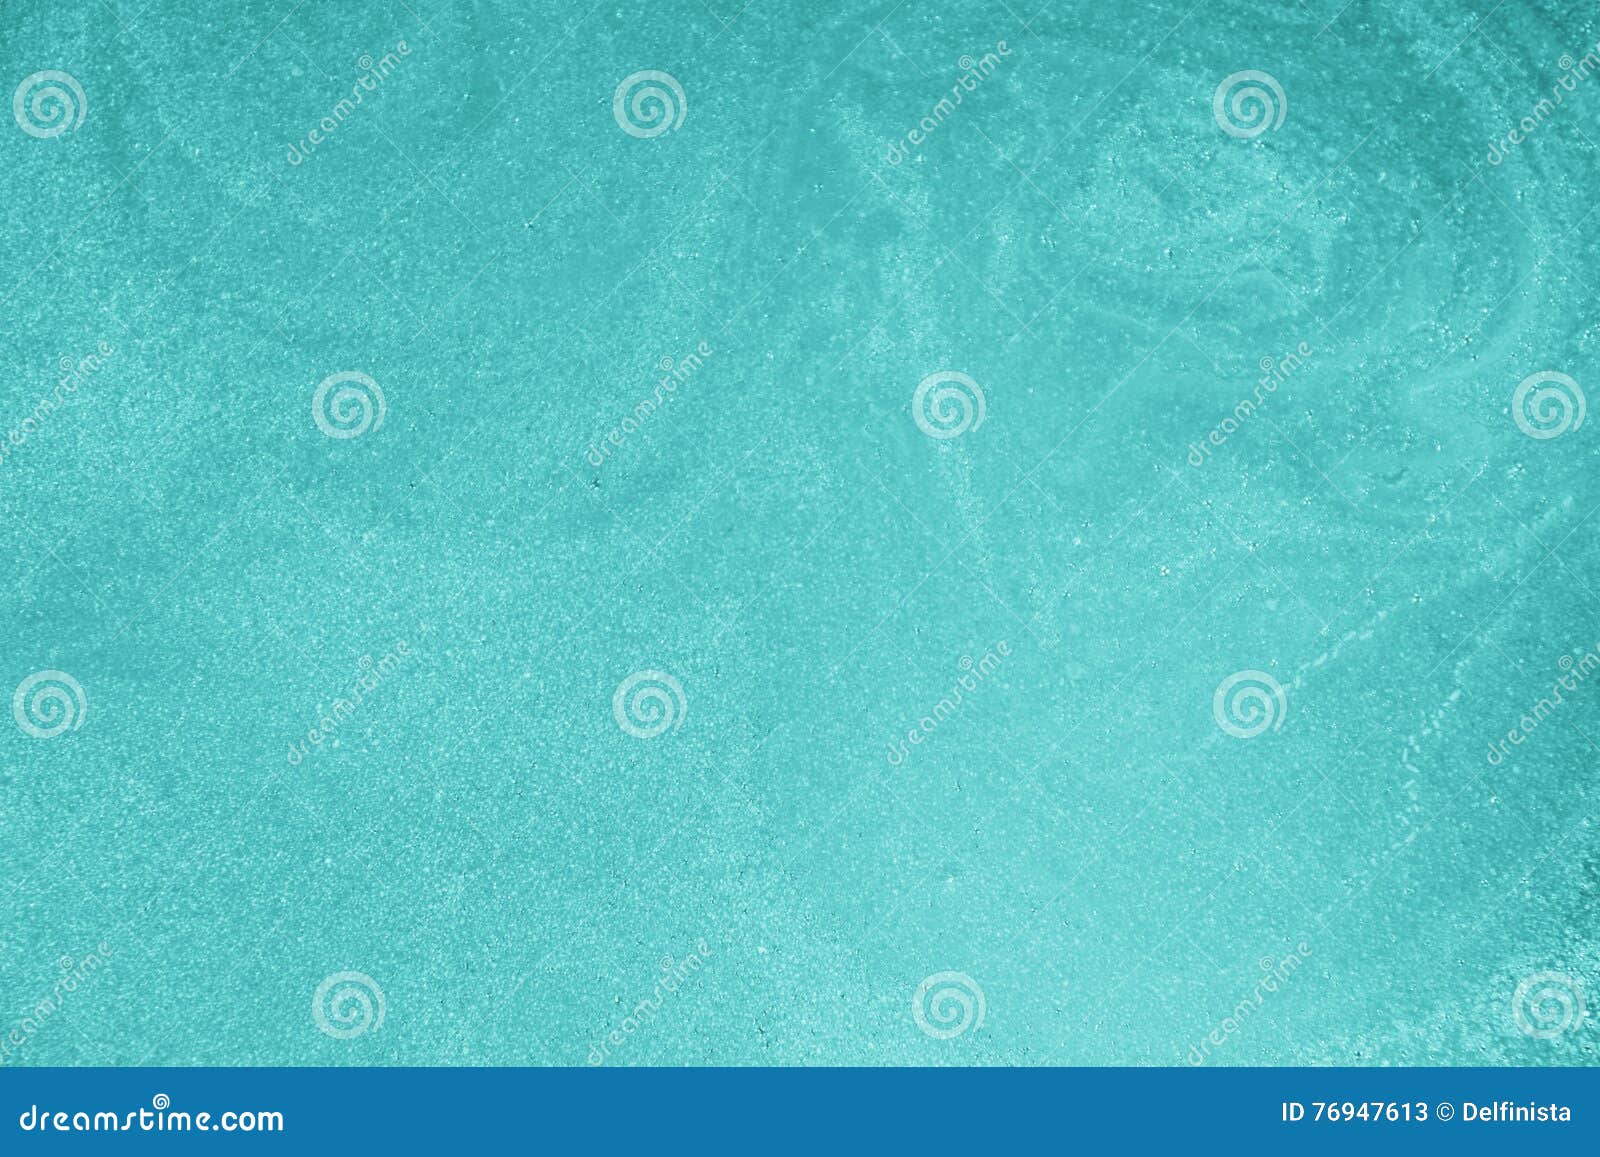 turquoise background - blue green stock photo